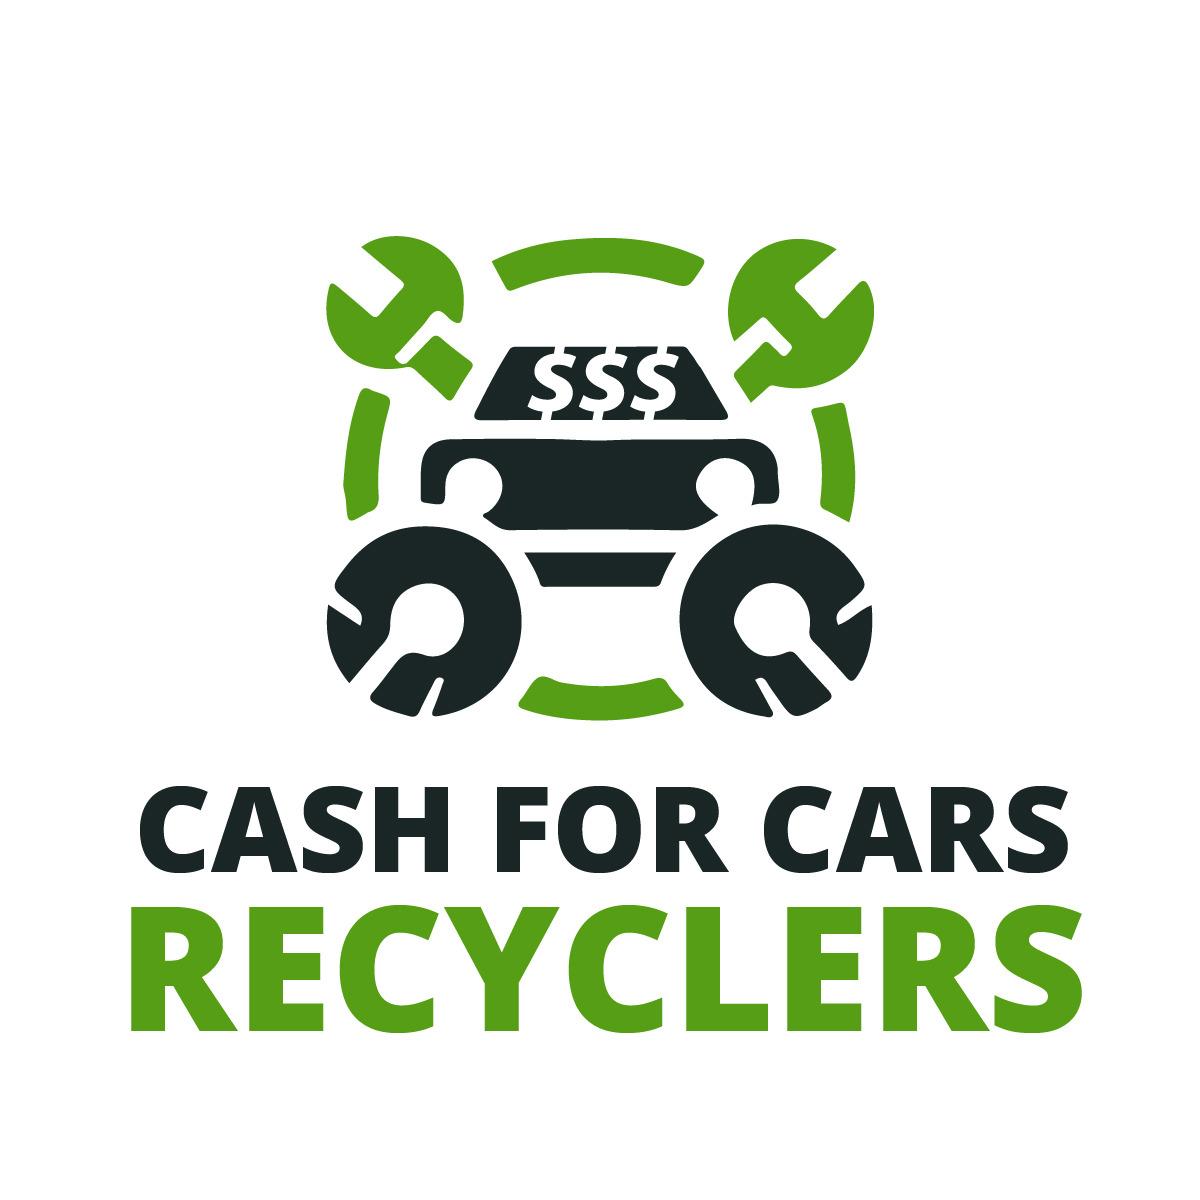 Cash for Cars Recyclers Logo